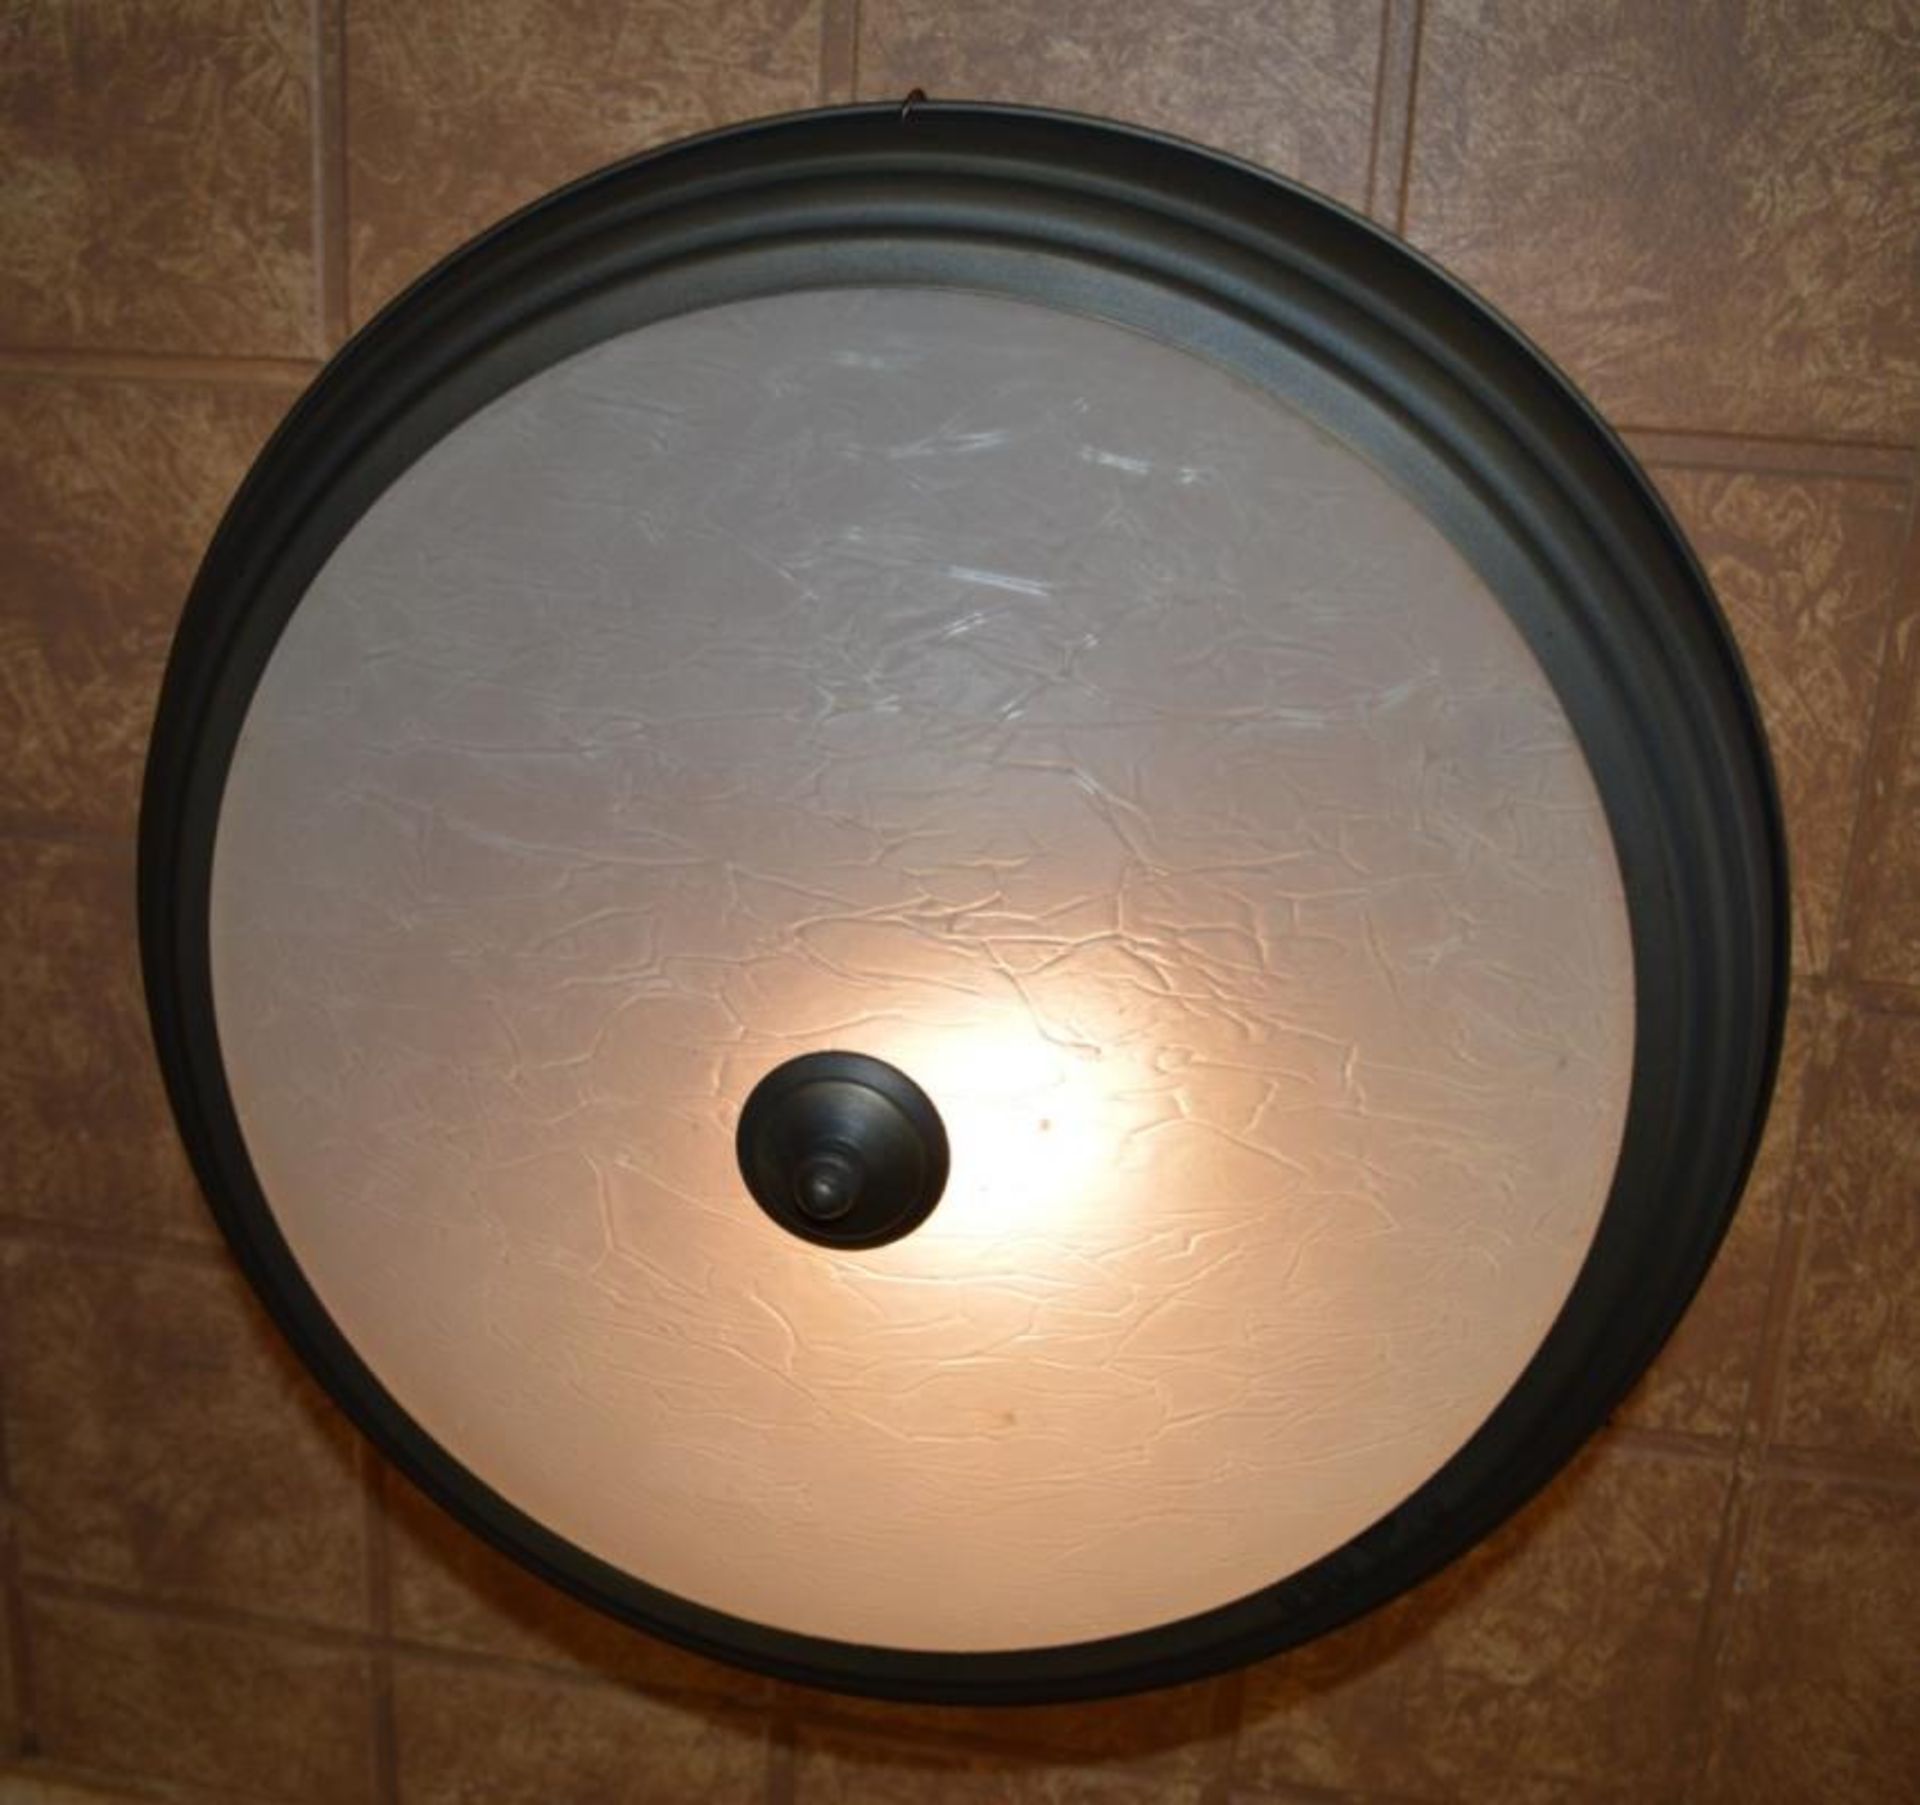 4 x Suspended Round Ceiling Lights Matt Frame and Frosted Glass Insert - Diameter 50 cms x Drop 60 c - Image 3 of 3